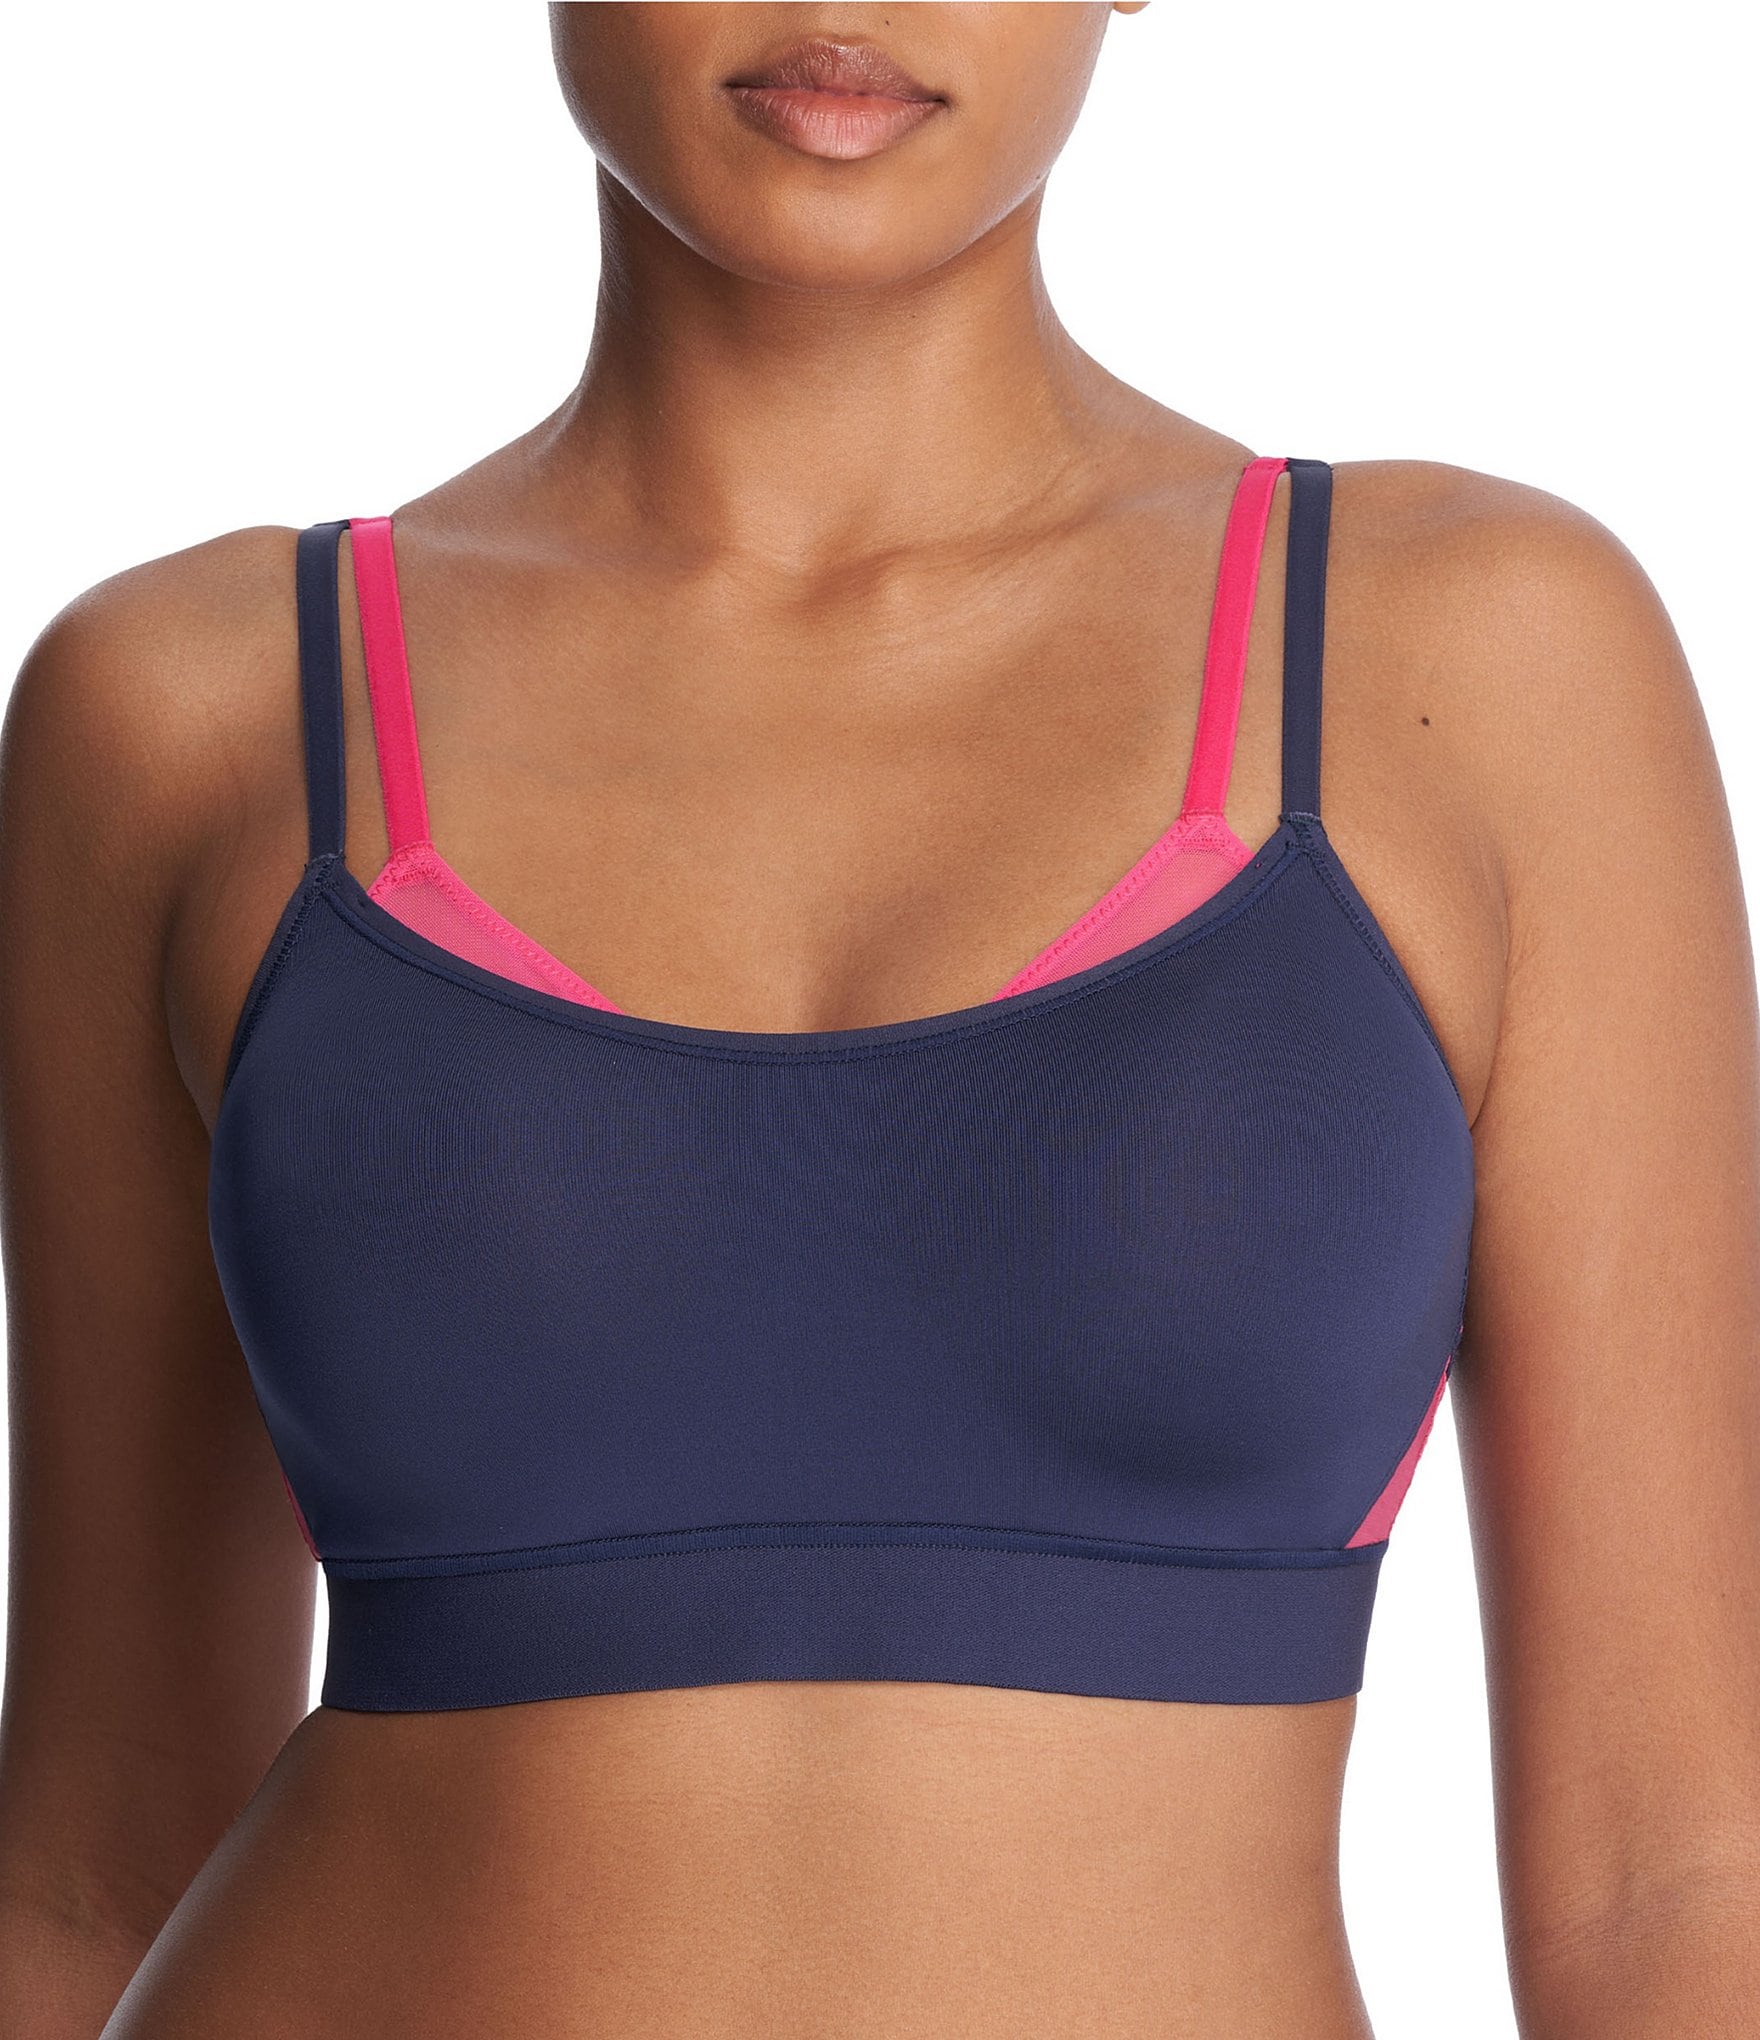 GRAVITY SUPPORTIVE SPORTS BRA, EXPECT LACE BRAS